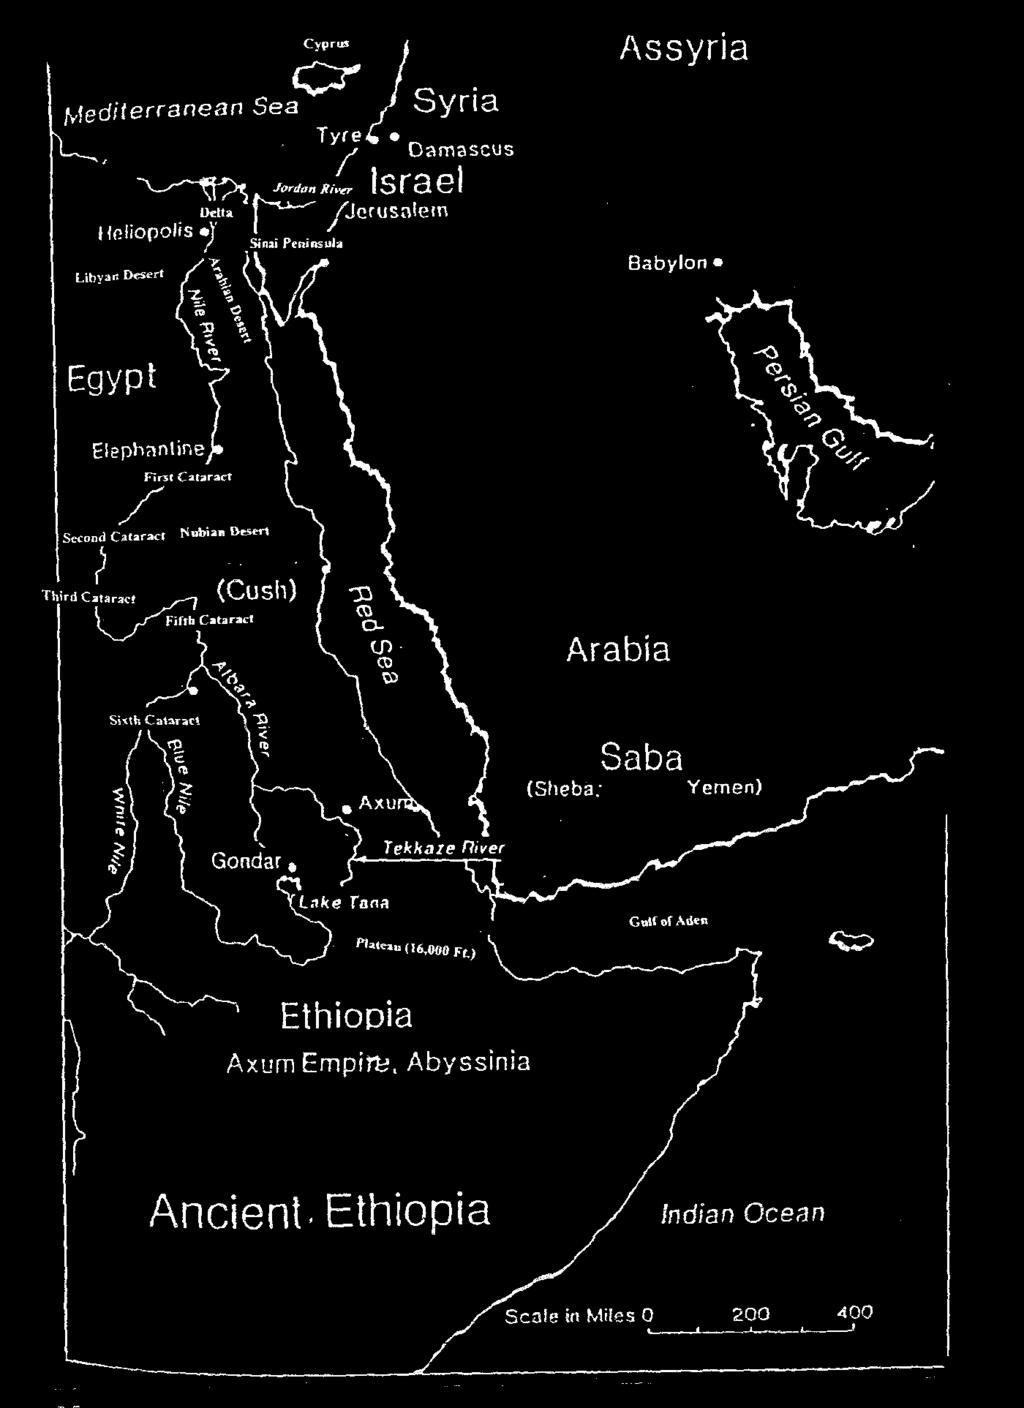 Map adapted from: Beta Israel, 1993 Curriculum Guide for Multiple Age